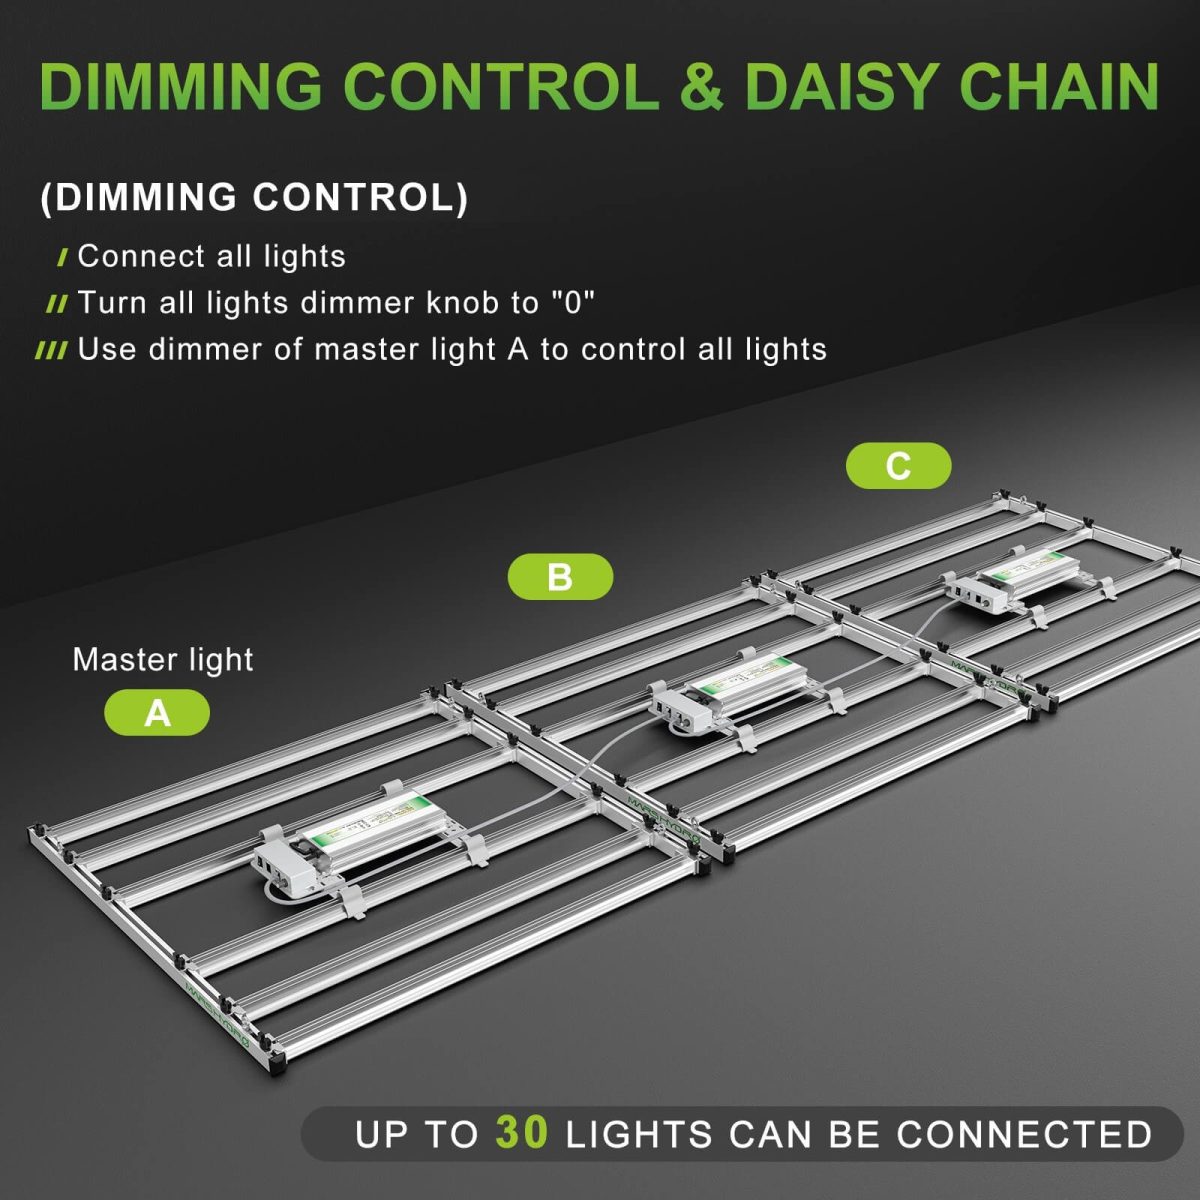 FC-E4800 LED grow lights support dimming daisy chain function to adjust light intensity of up to 30 LEDs with one dimmer.